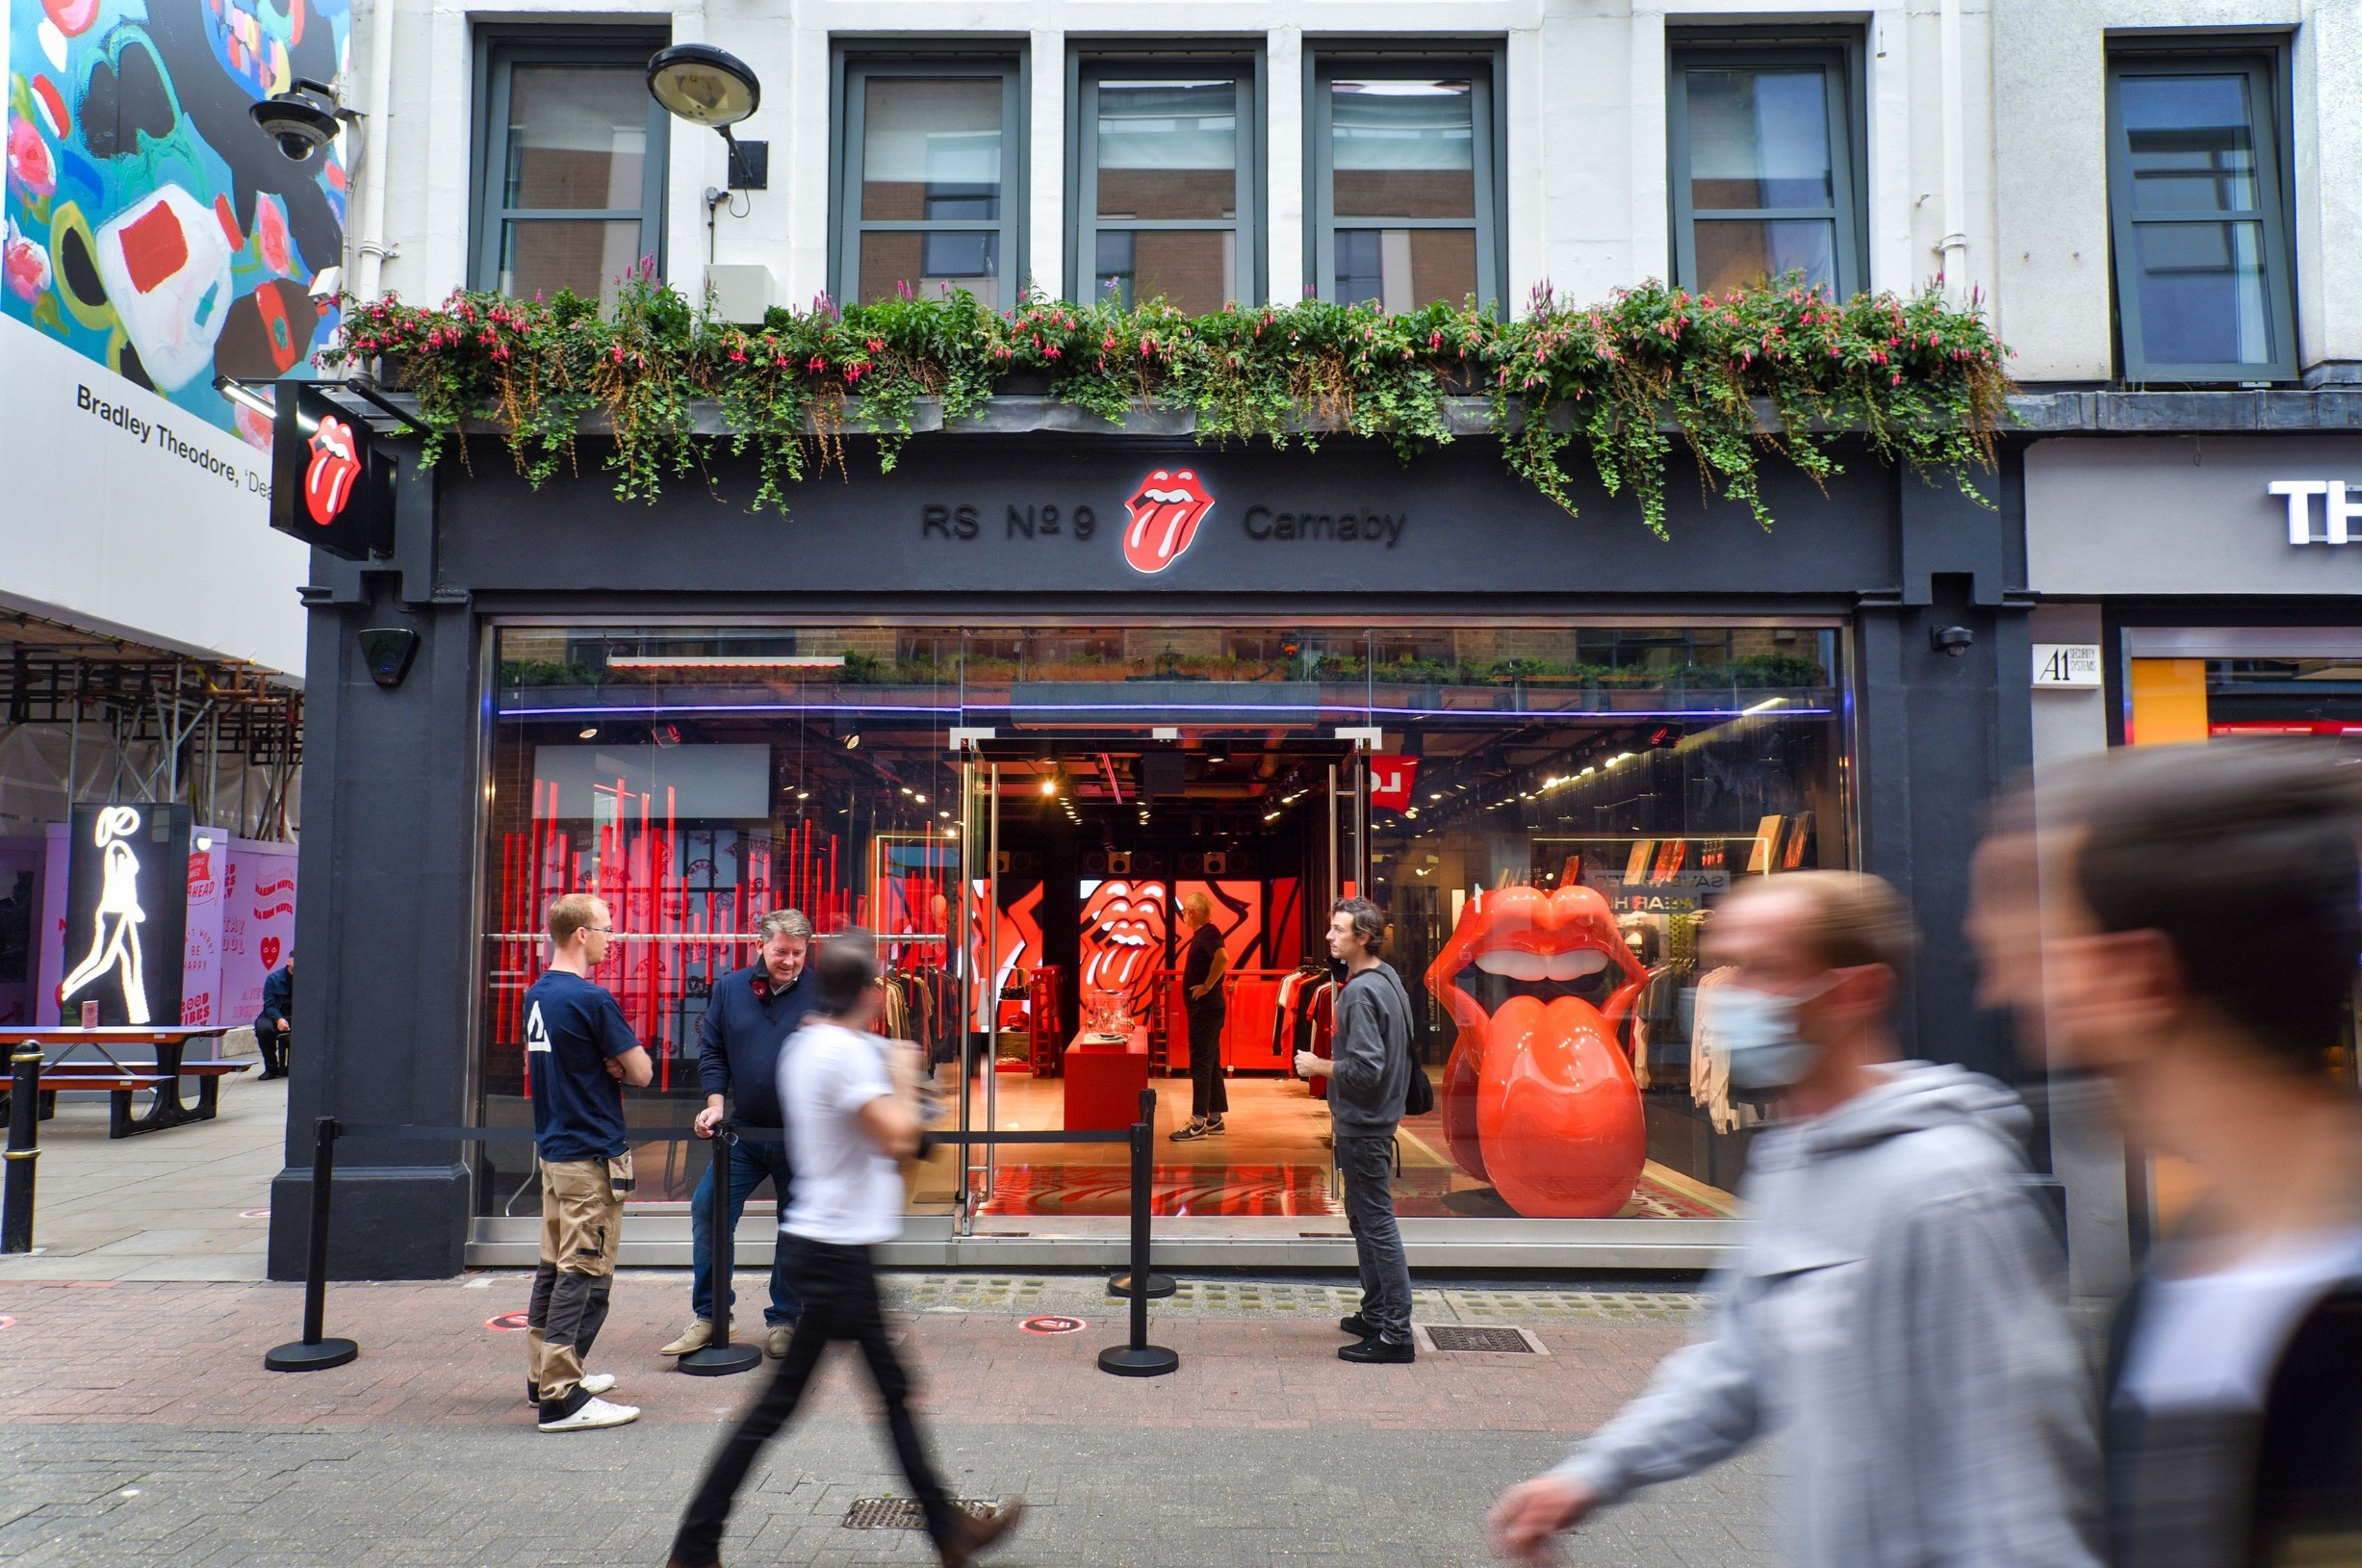 The world's first permanent Rolling Stones store has opened in London's famous Carnaby Street.
The Rolling Stones global flagship store in London, UK - 09 Sept 2020,Image: 557160946, License: Rights-managed, Restrictions: , Model Release: no, Credit line: Dave Rushen/SOPA Images / Shutterstock Editorial / Profimedia